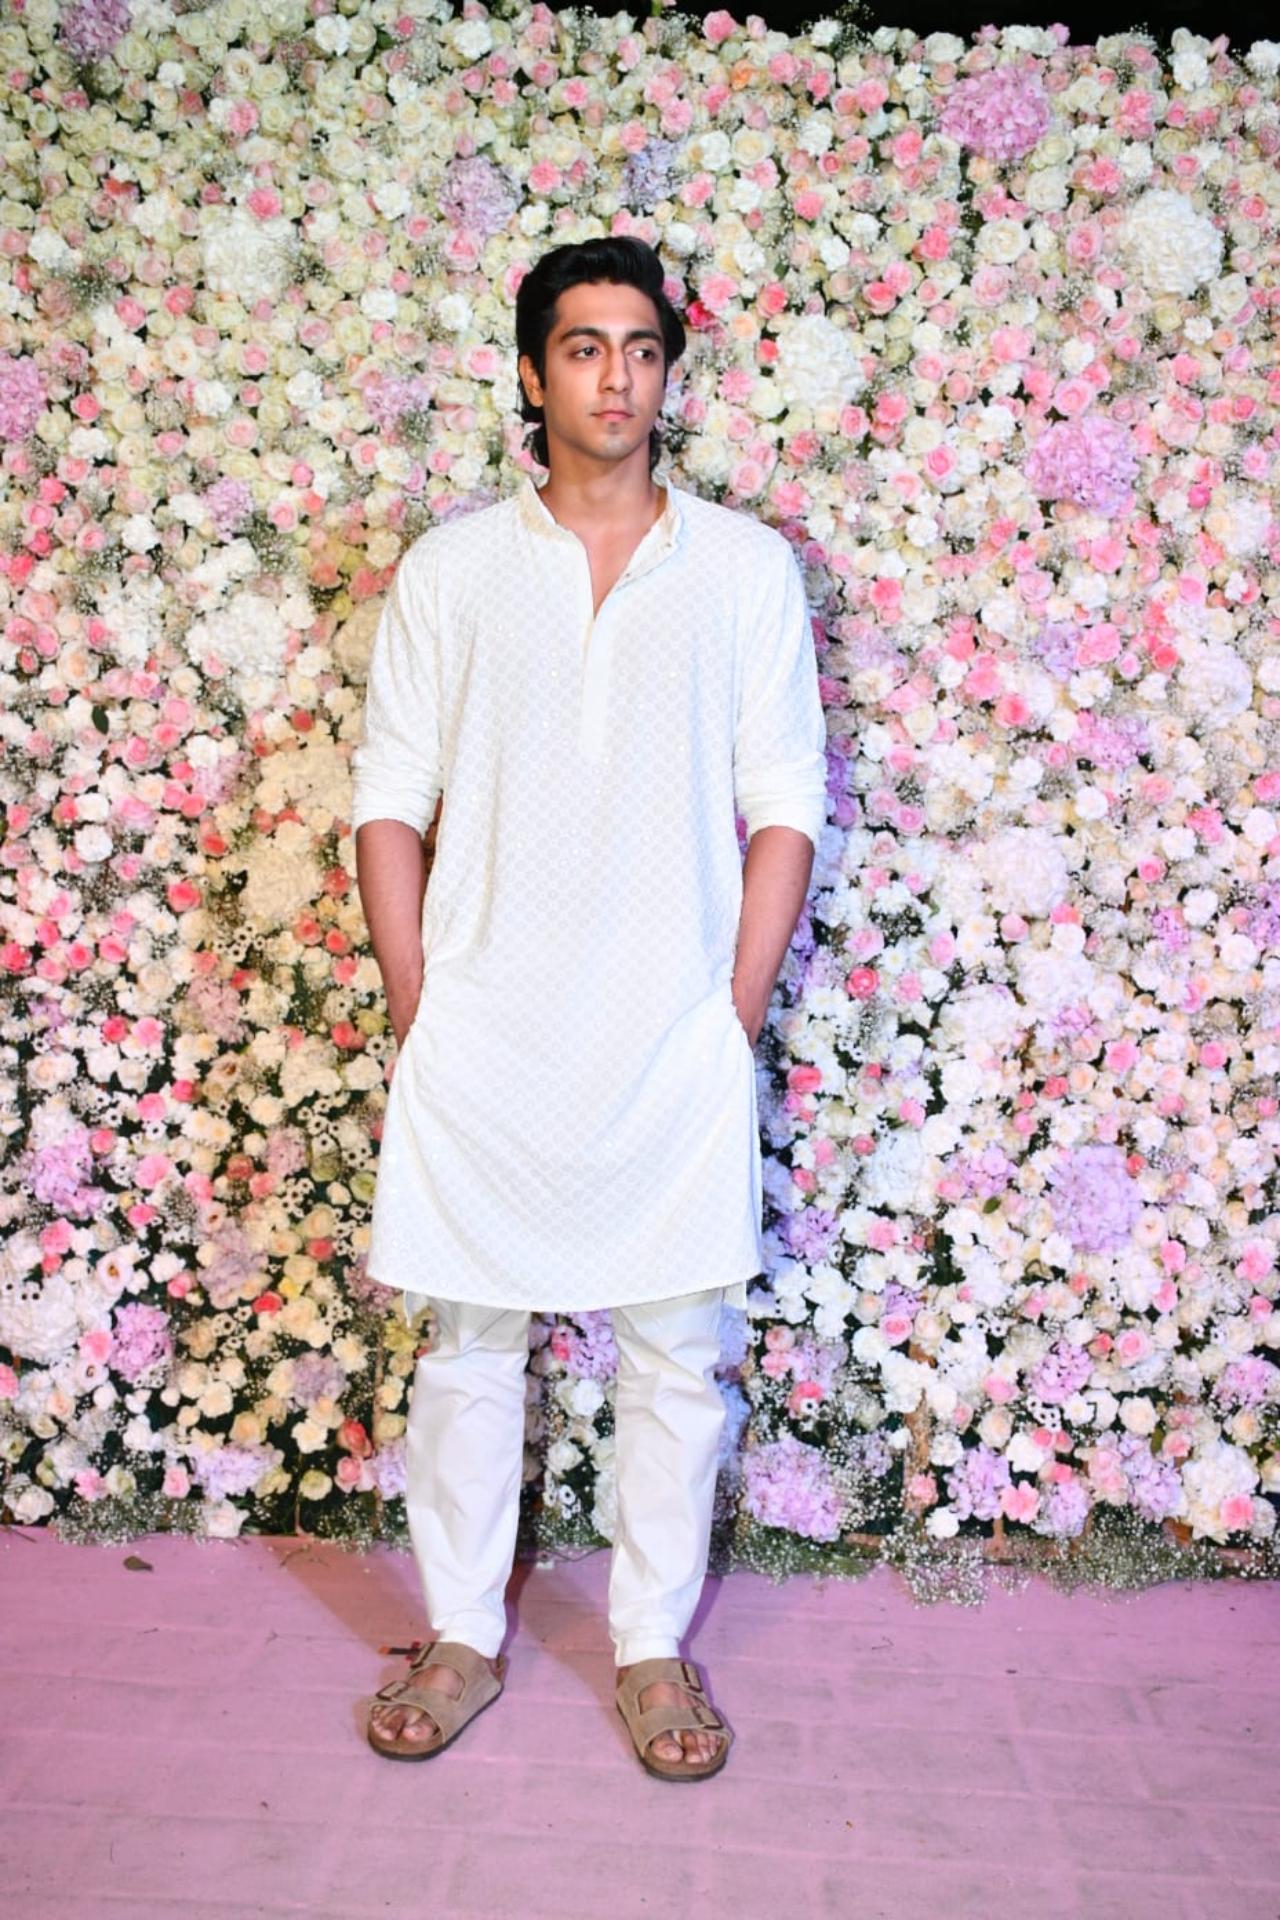 Ananya Panday's cousin Ahan Pandey is often seen at Bollywood parties. Seems like the actor's film debut is on the cards